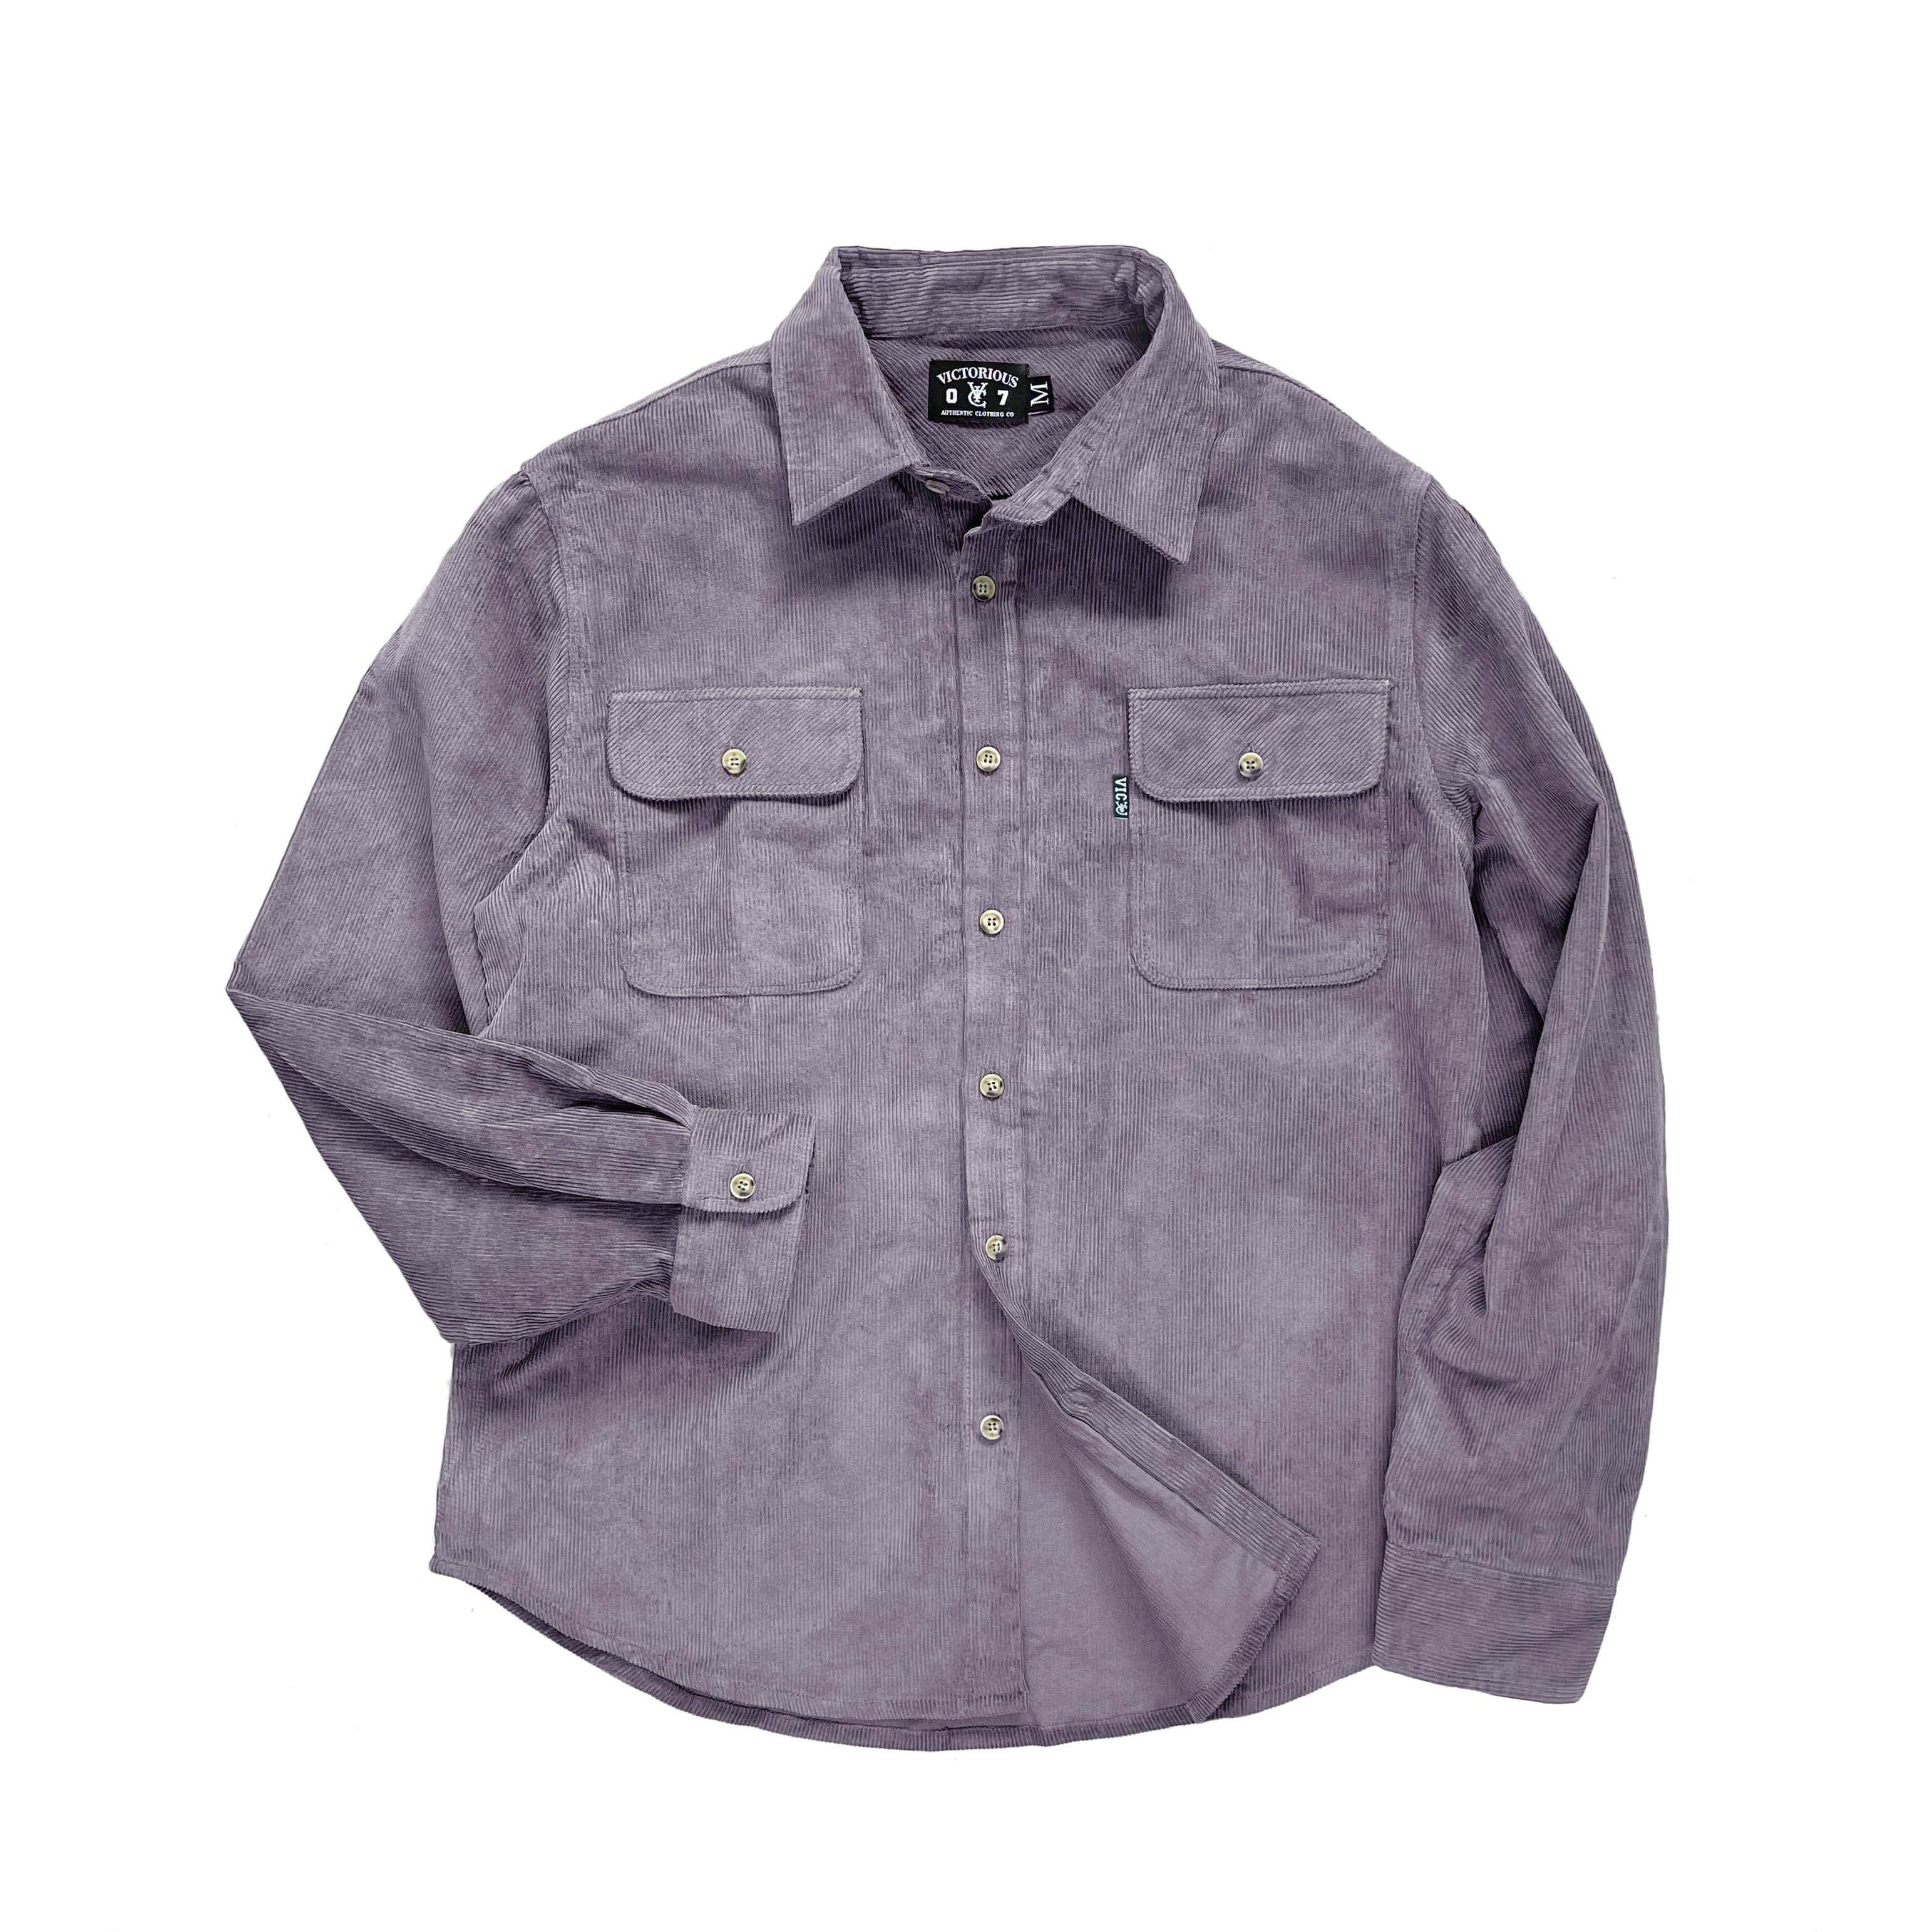 Relaxed fit 100% cotton corduroy 2 chest pockets Standard shirttail hem Woven VIC label at pocket Kyle is 178cm and wears a size L Cord Overshirt